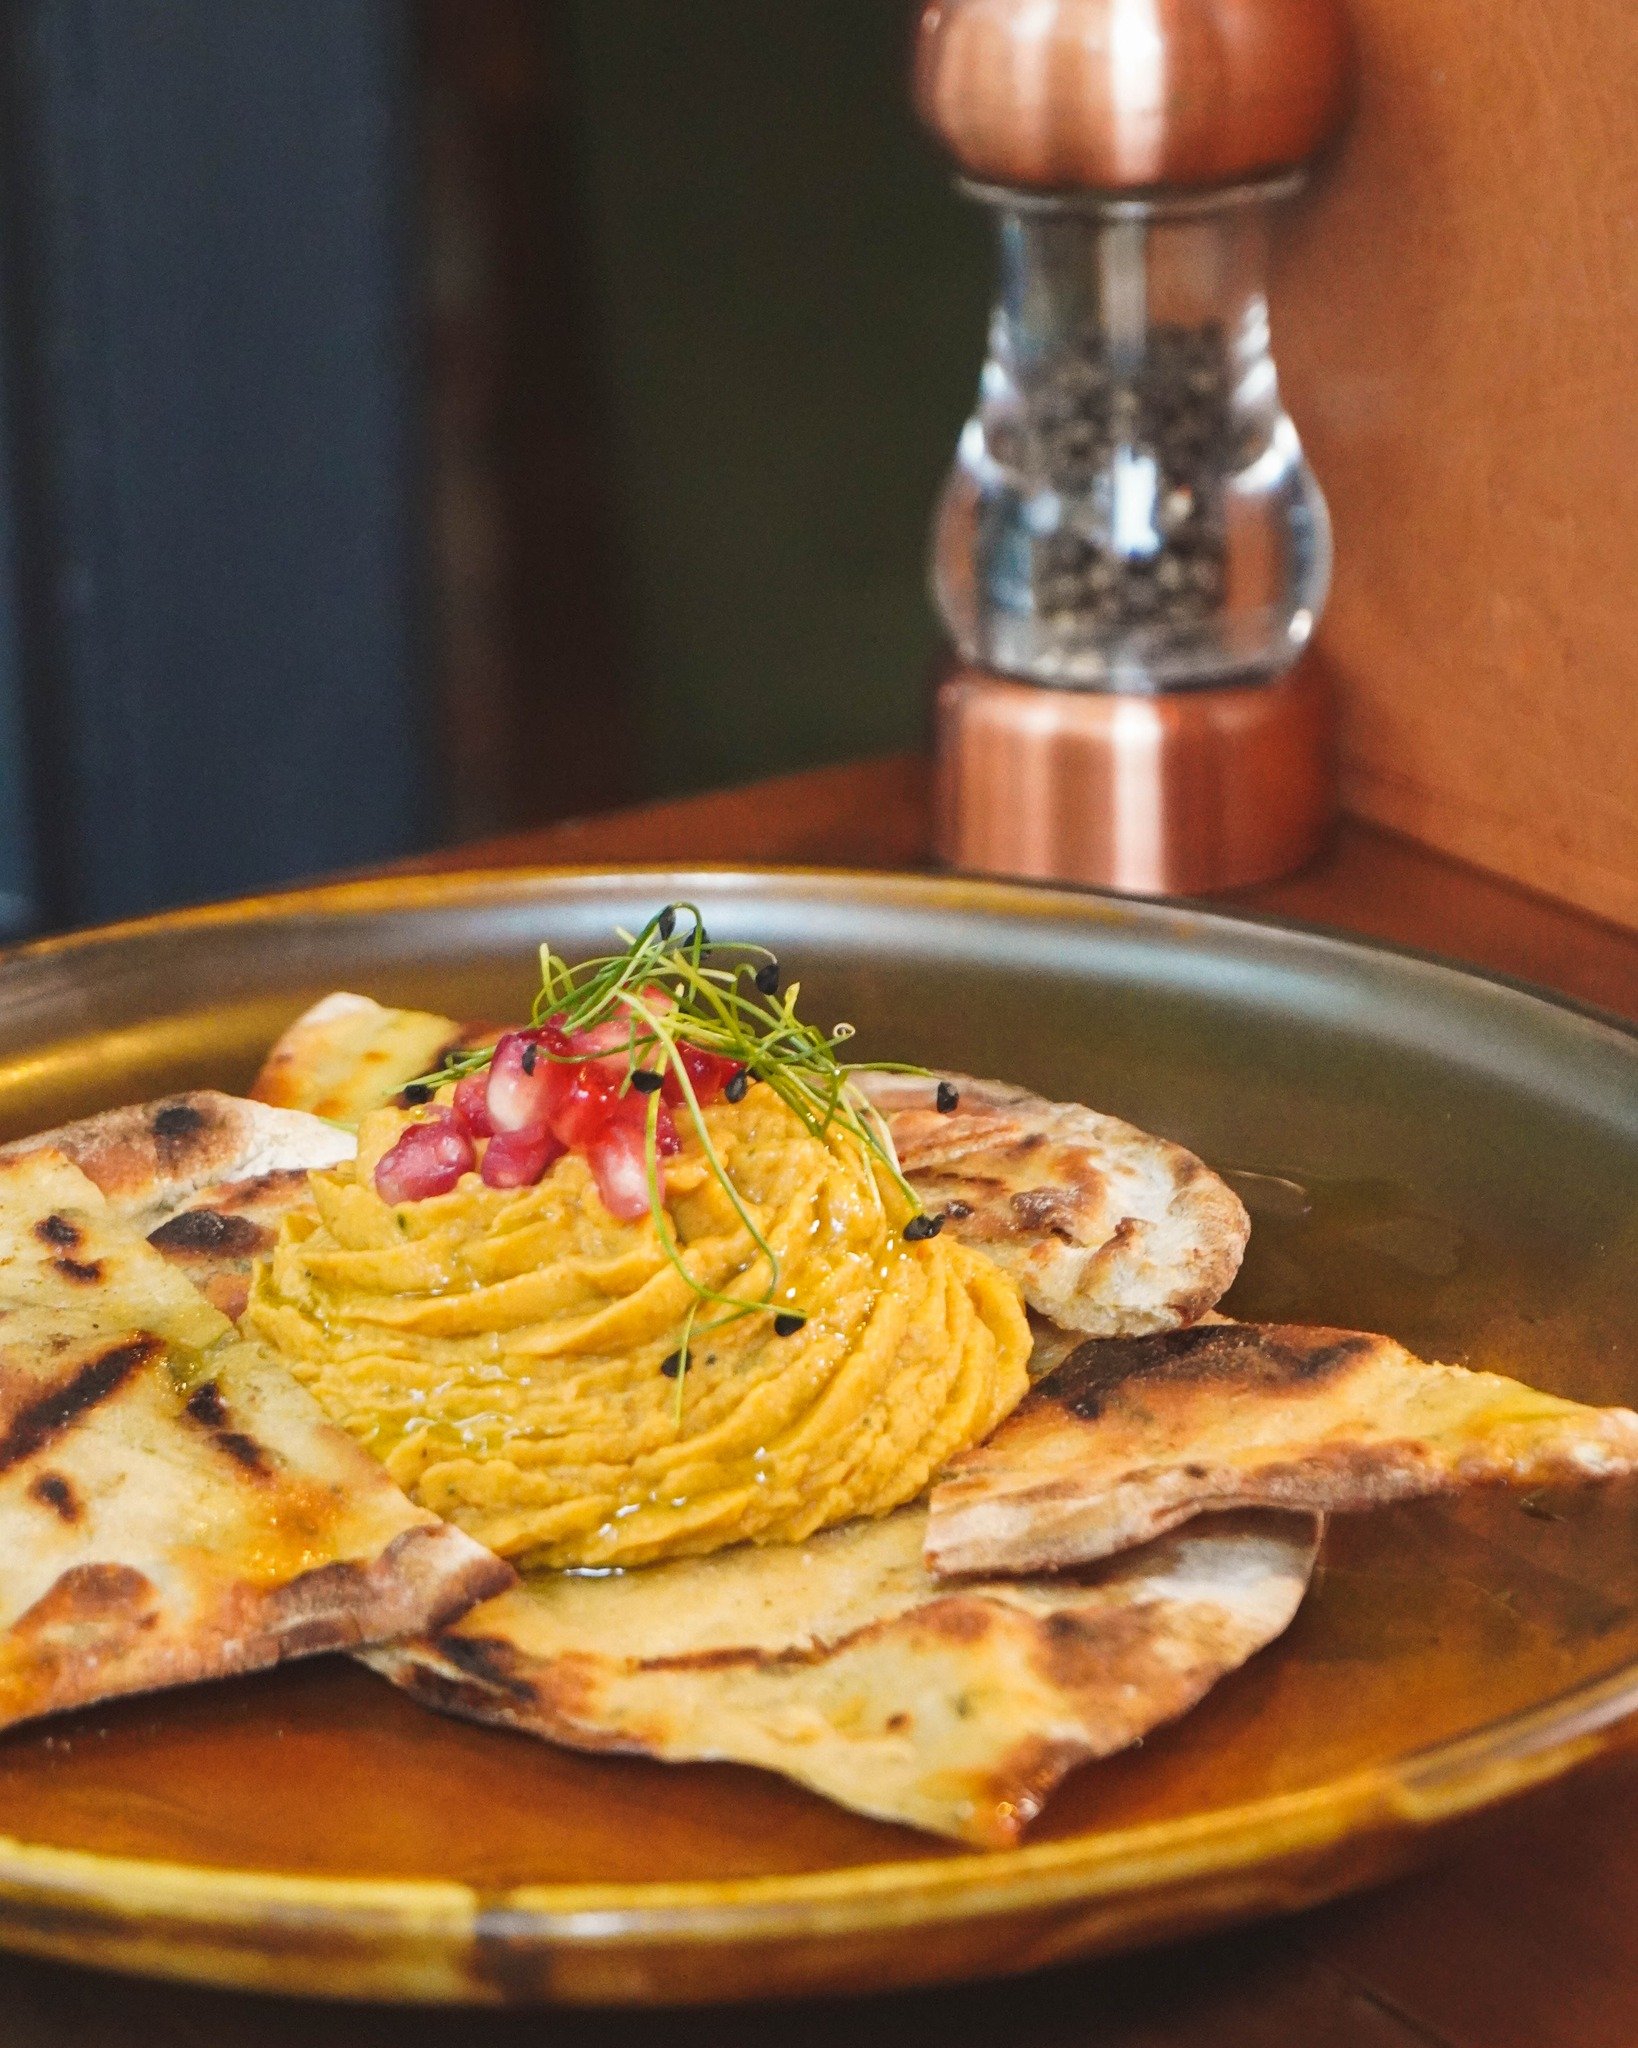 After a light bite? 🤔

Indulge in a delicately spiced hummus, served with a homemade flatbread, drizzled with coriander oil and sprinkled with pomegranate. Pairs perfectly with a glass of dry white wine 👌

Book your table now via the link in bio 🔗